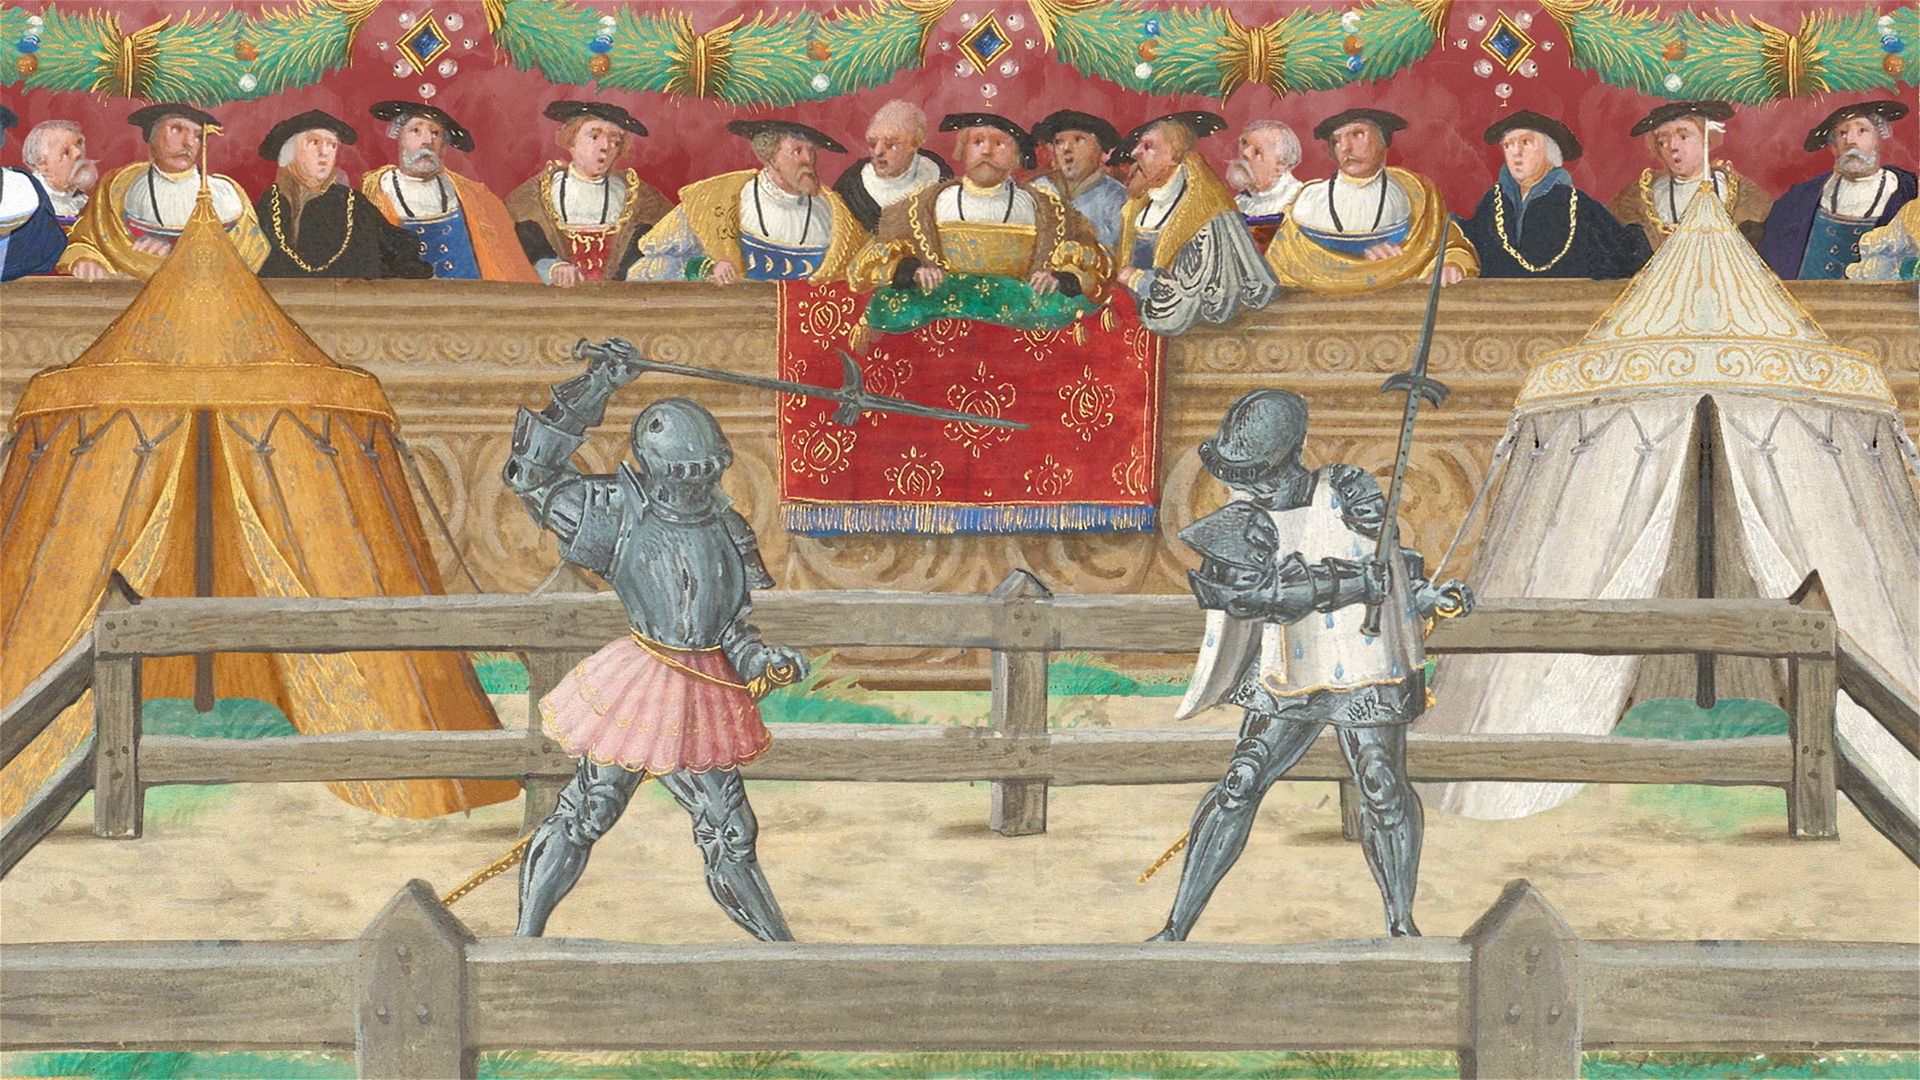 Unhorse Your Foe! Knightly Tournament Games from Medieval Europe | The